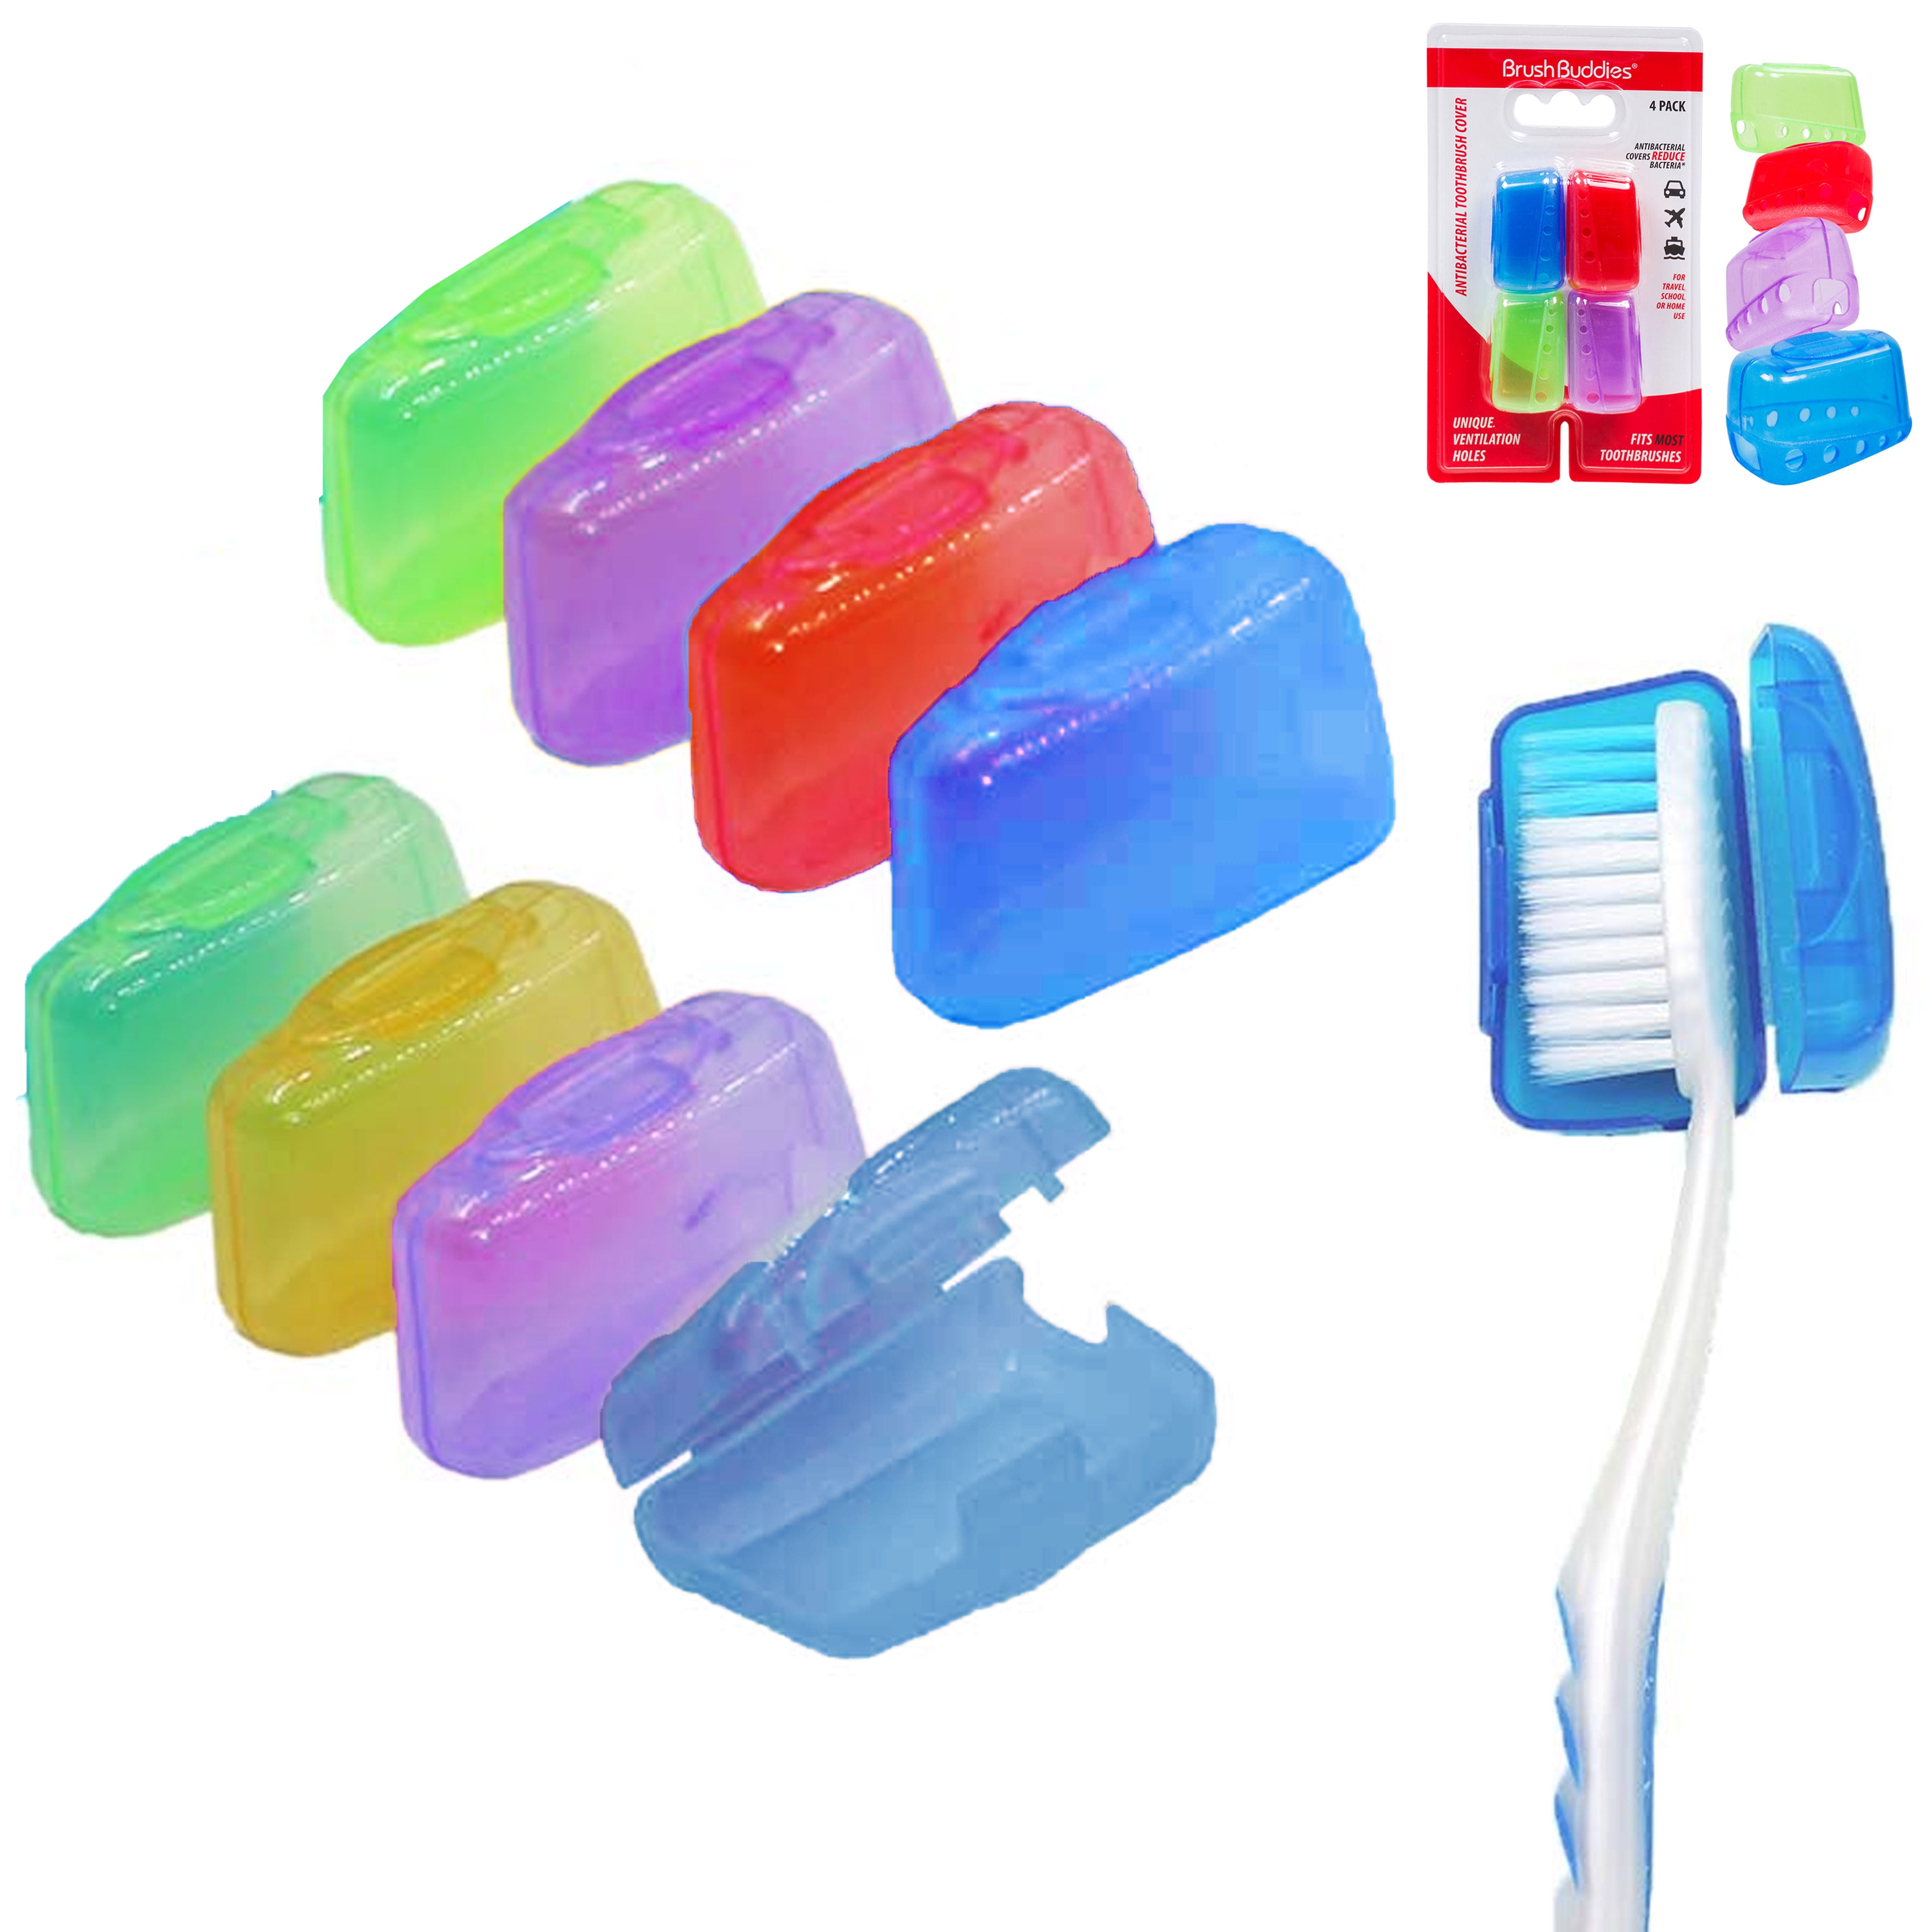 4pcs/Electric Toothbrush Head Cover Protector Cap For Philips Tooth Brushes 